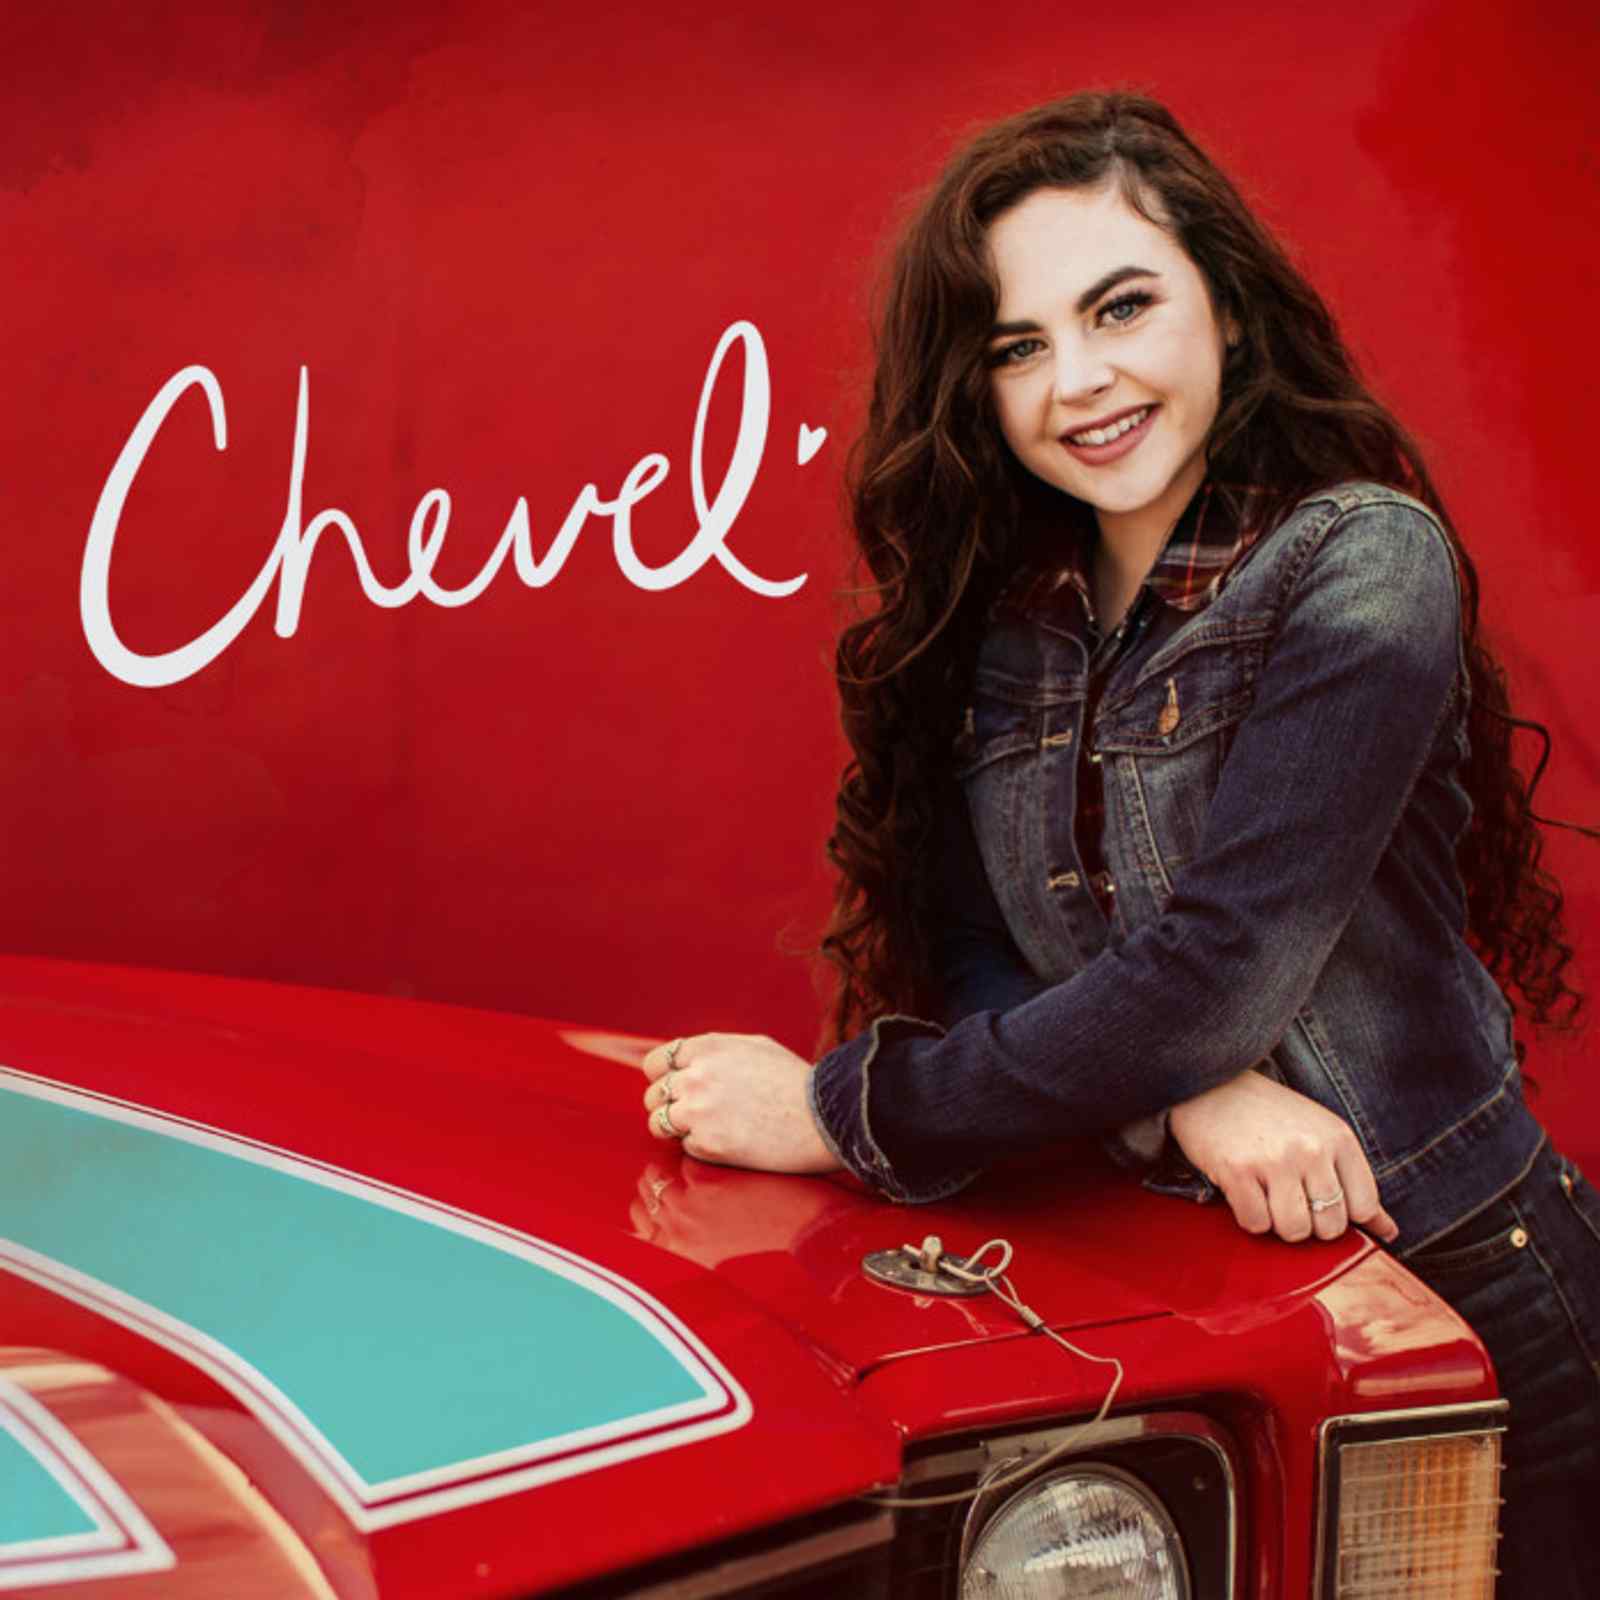 New Song: "The Letter" by Chevel Shepherd